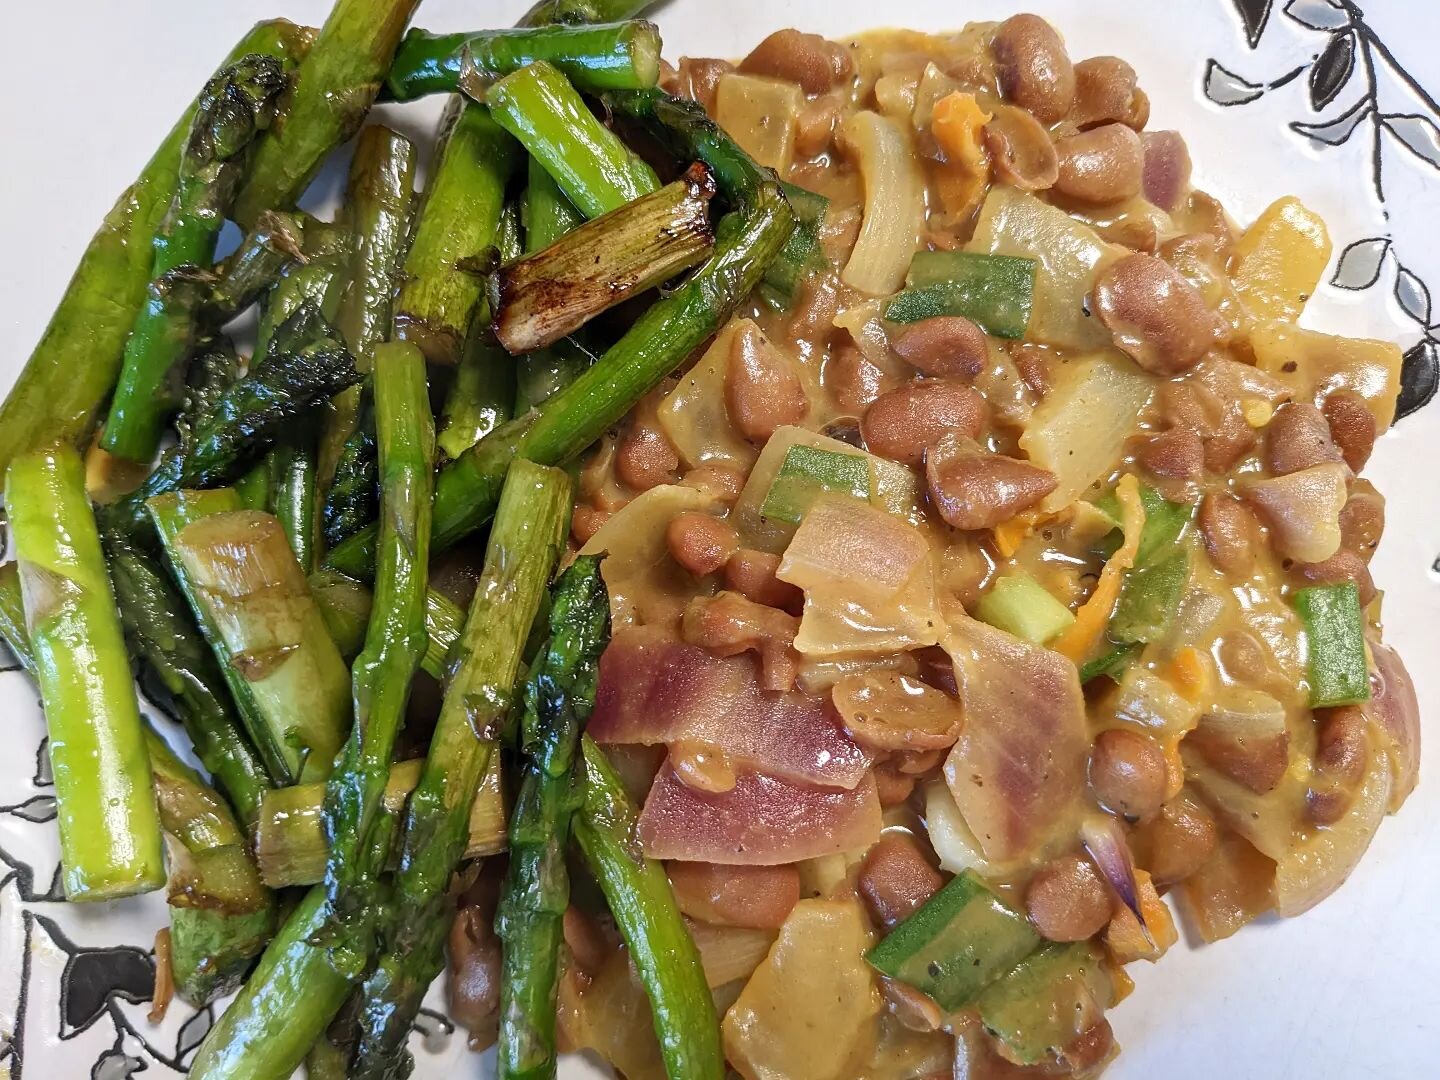 Beans and Asparagus. This is so good, but the way the asparagus was cooked can be adapted to other veggies. #beans #asparagus #healthymeals #fastfood #easymeals @divinecooking